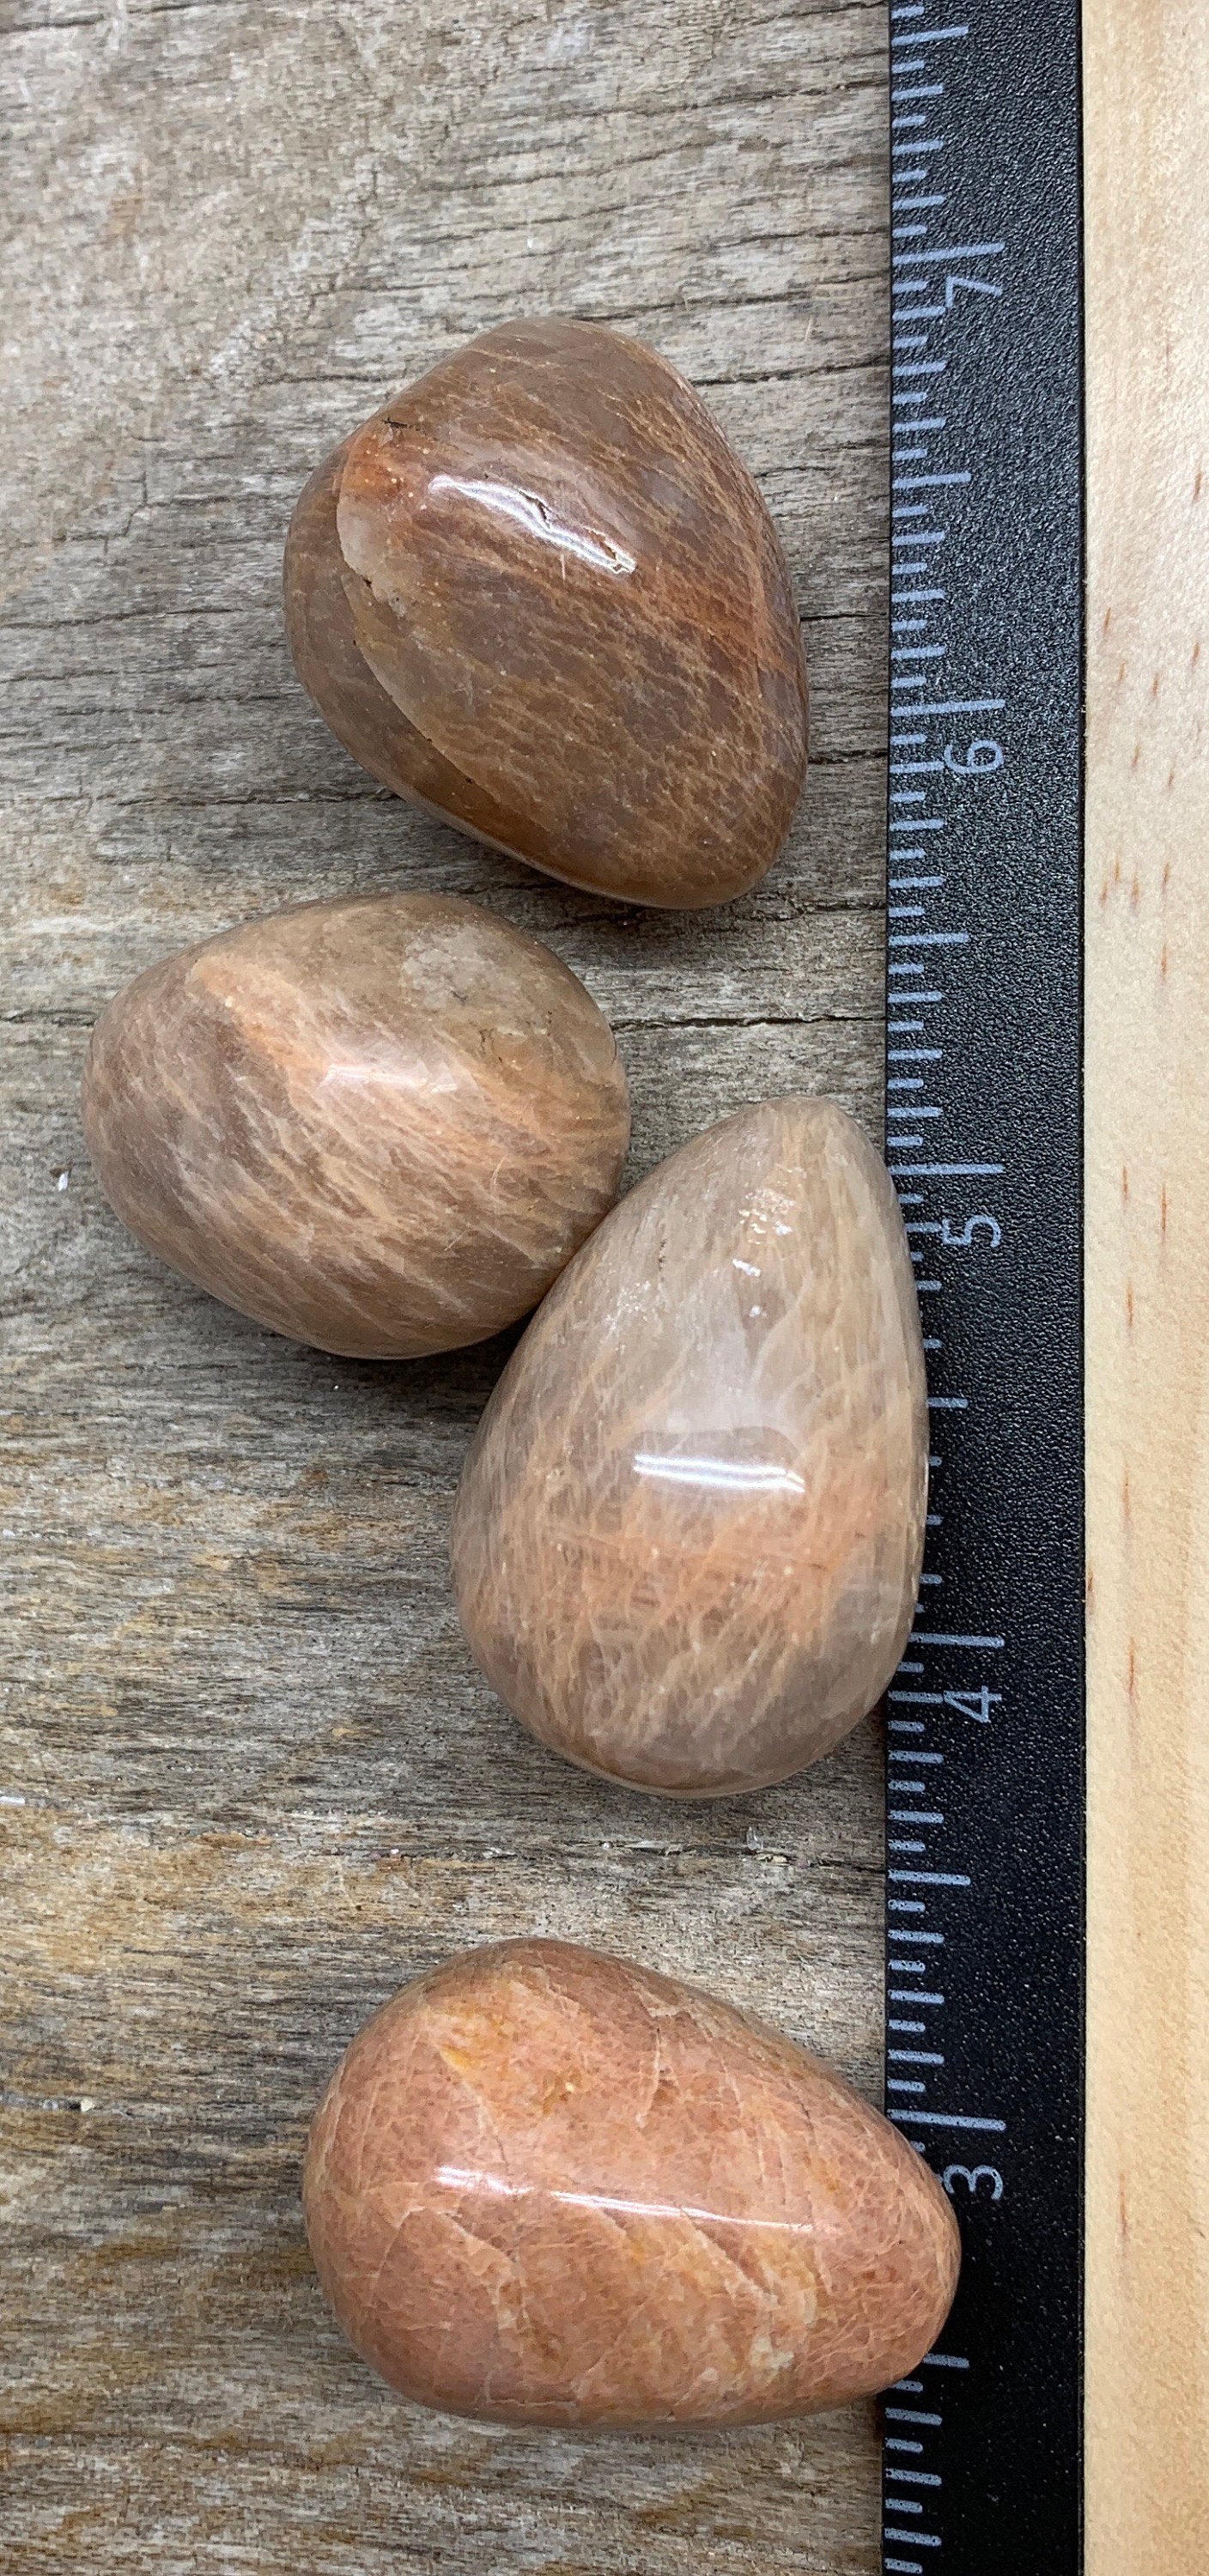 Peach Moonstone Egg Natural 1542 (Approx. 1”- 1 1/2”)